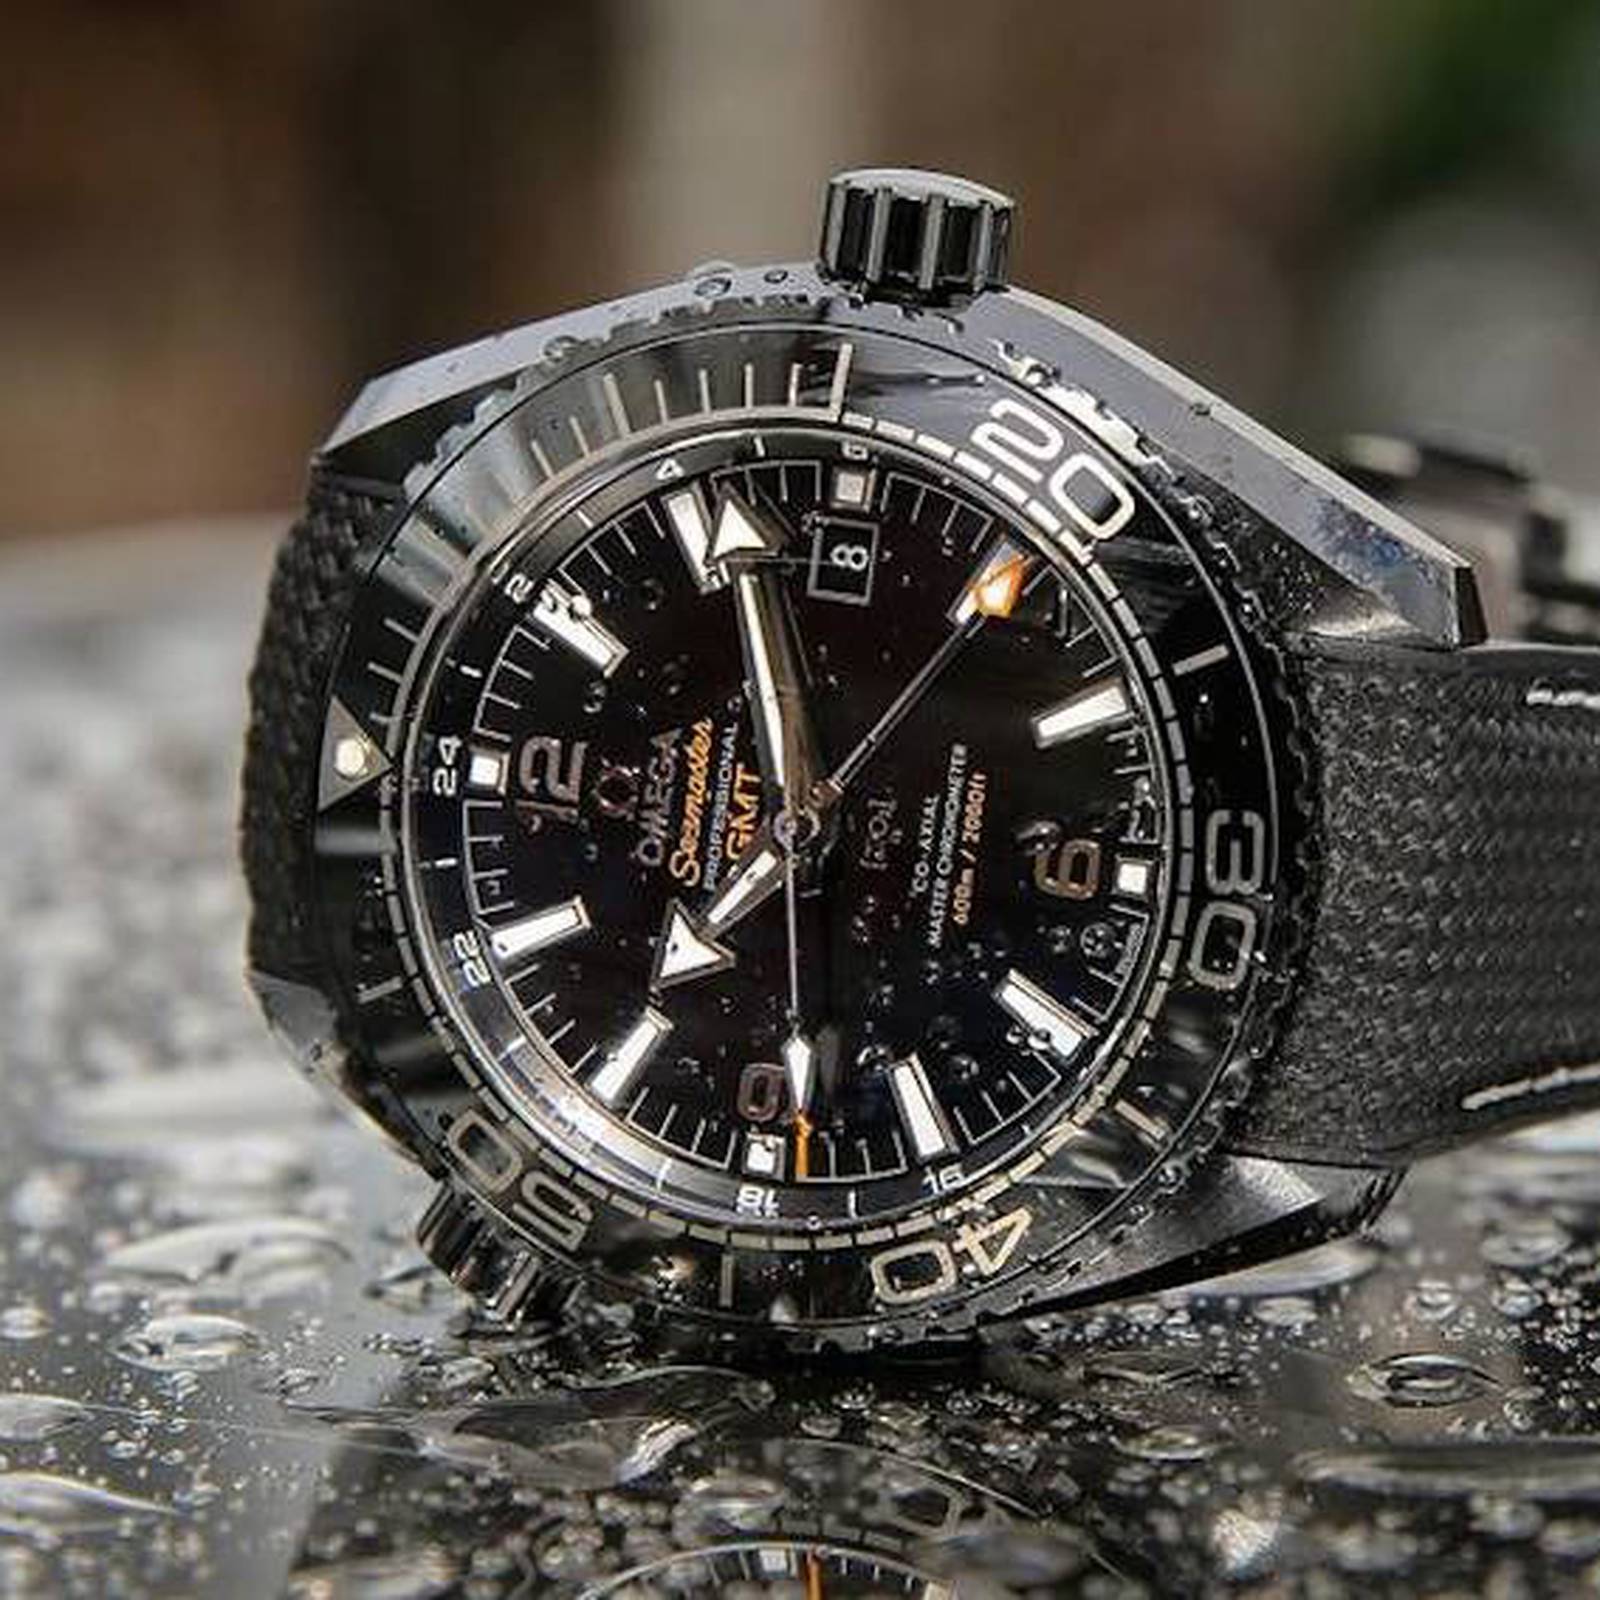 Omega Raises Luxury Watch Prices as Other Swatch Brands Struggle | BoF